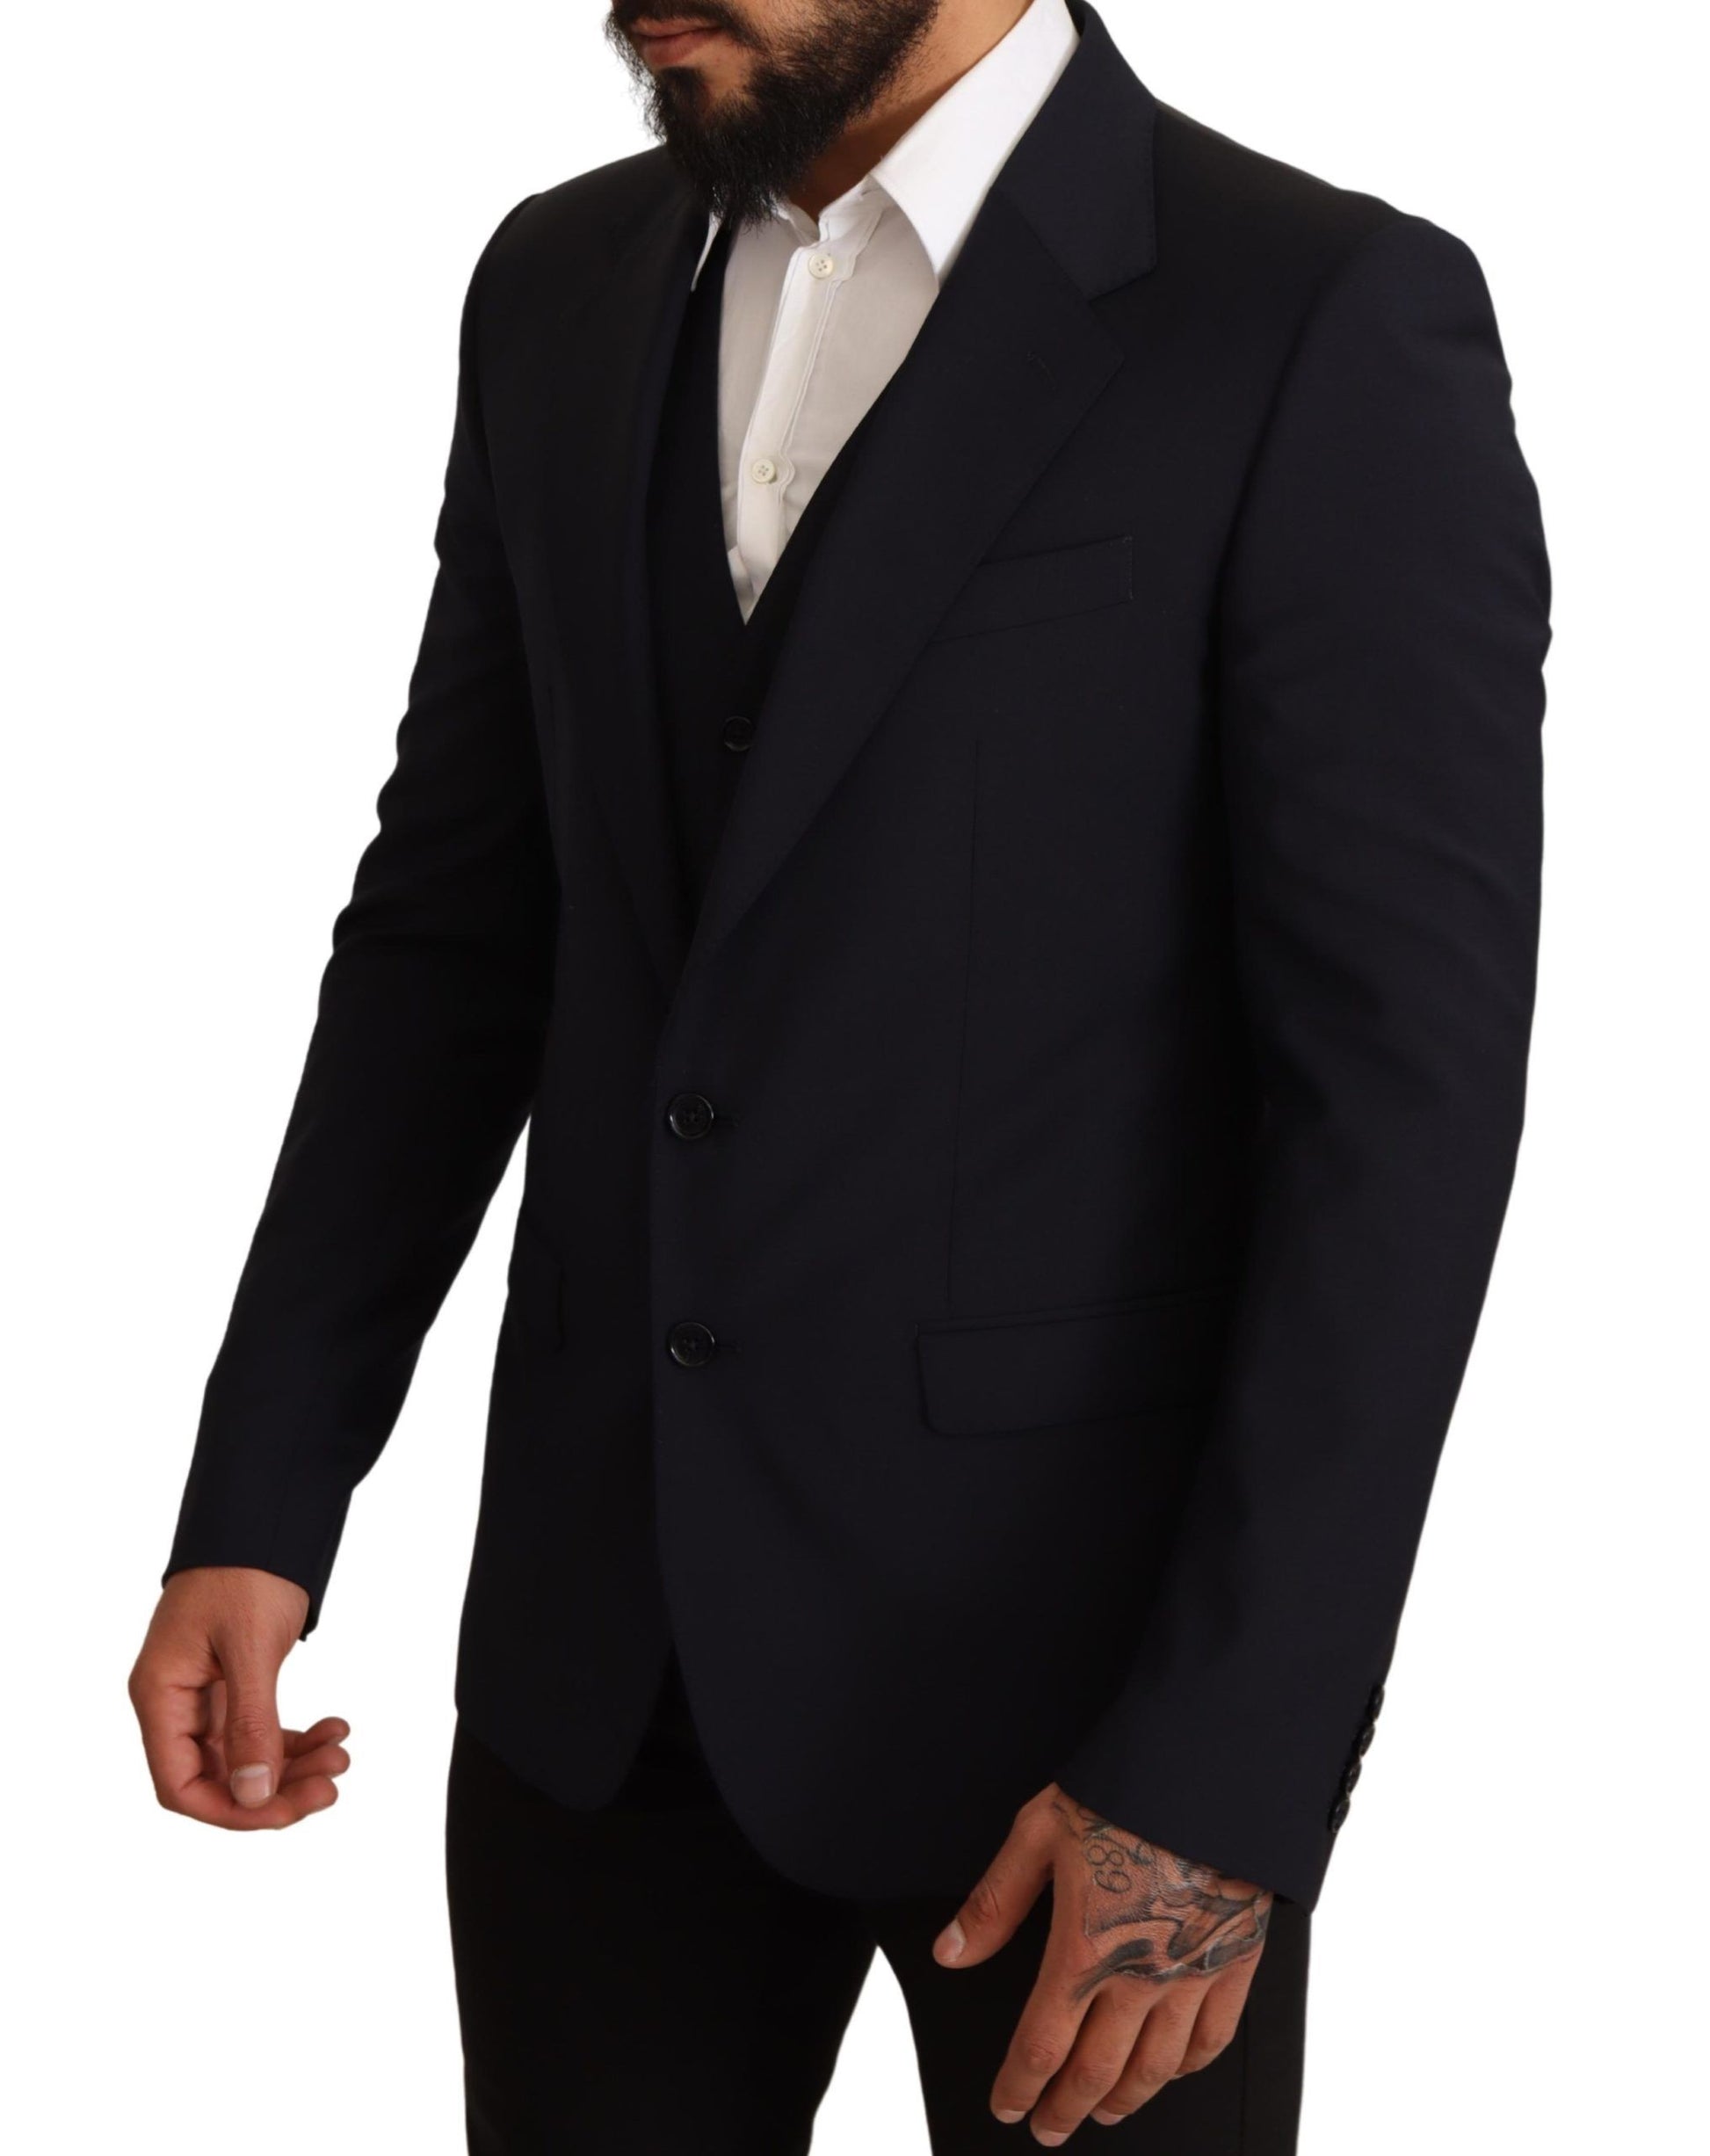 Dolce & Gabbana Men's Blue 2 Piece MARTINI Blazer Suit Jacket - Designed by Dolce & Gabbana Available to Buy at a Discounted Price on Moon Behind The Hill Online Designer Discount Store